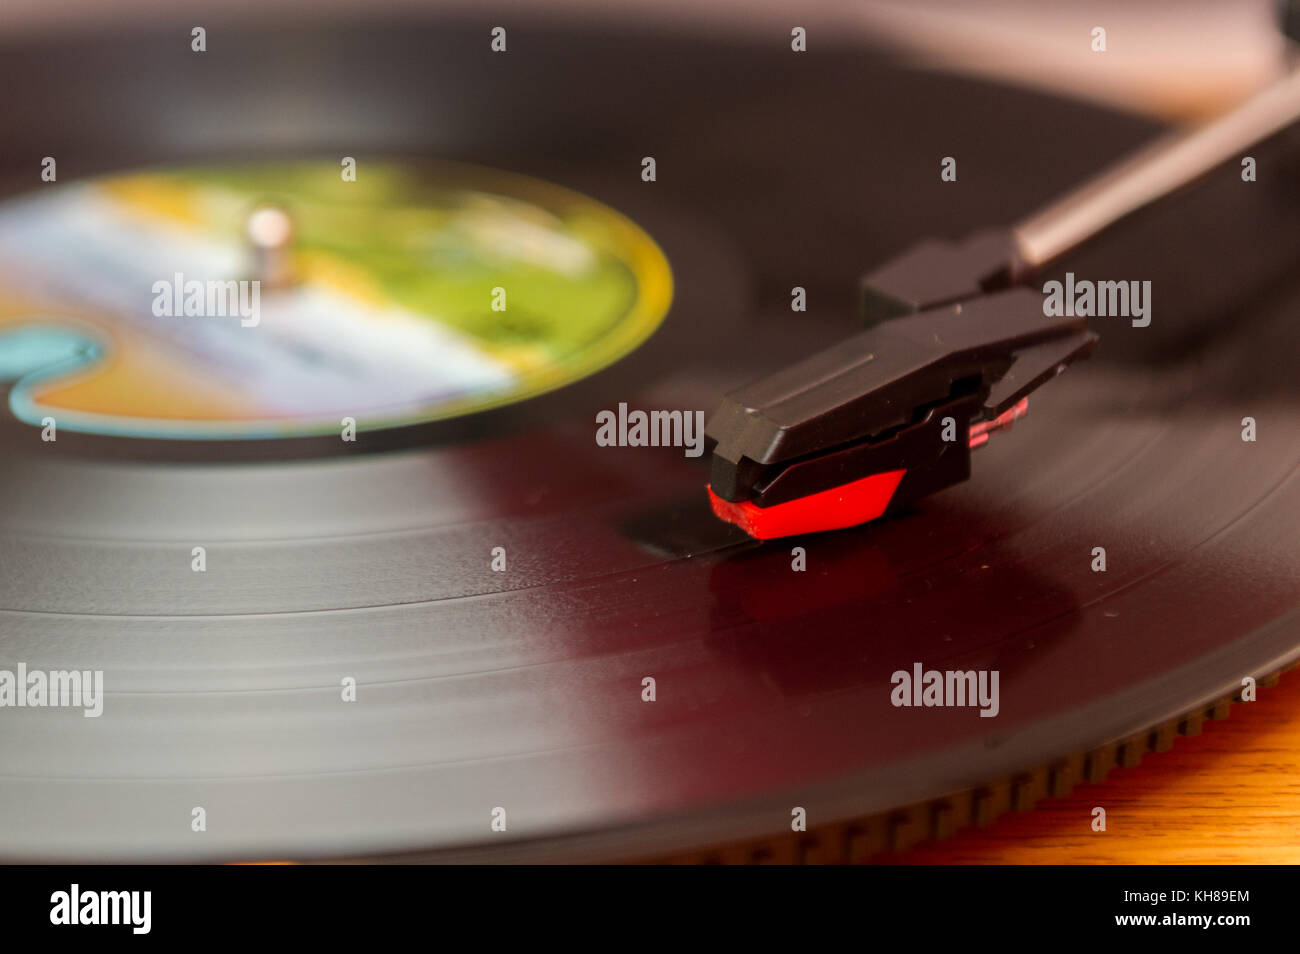 Vinyl record album playing on a record player, turntable. Stock Photo